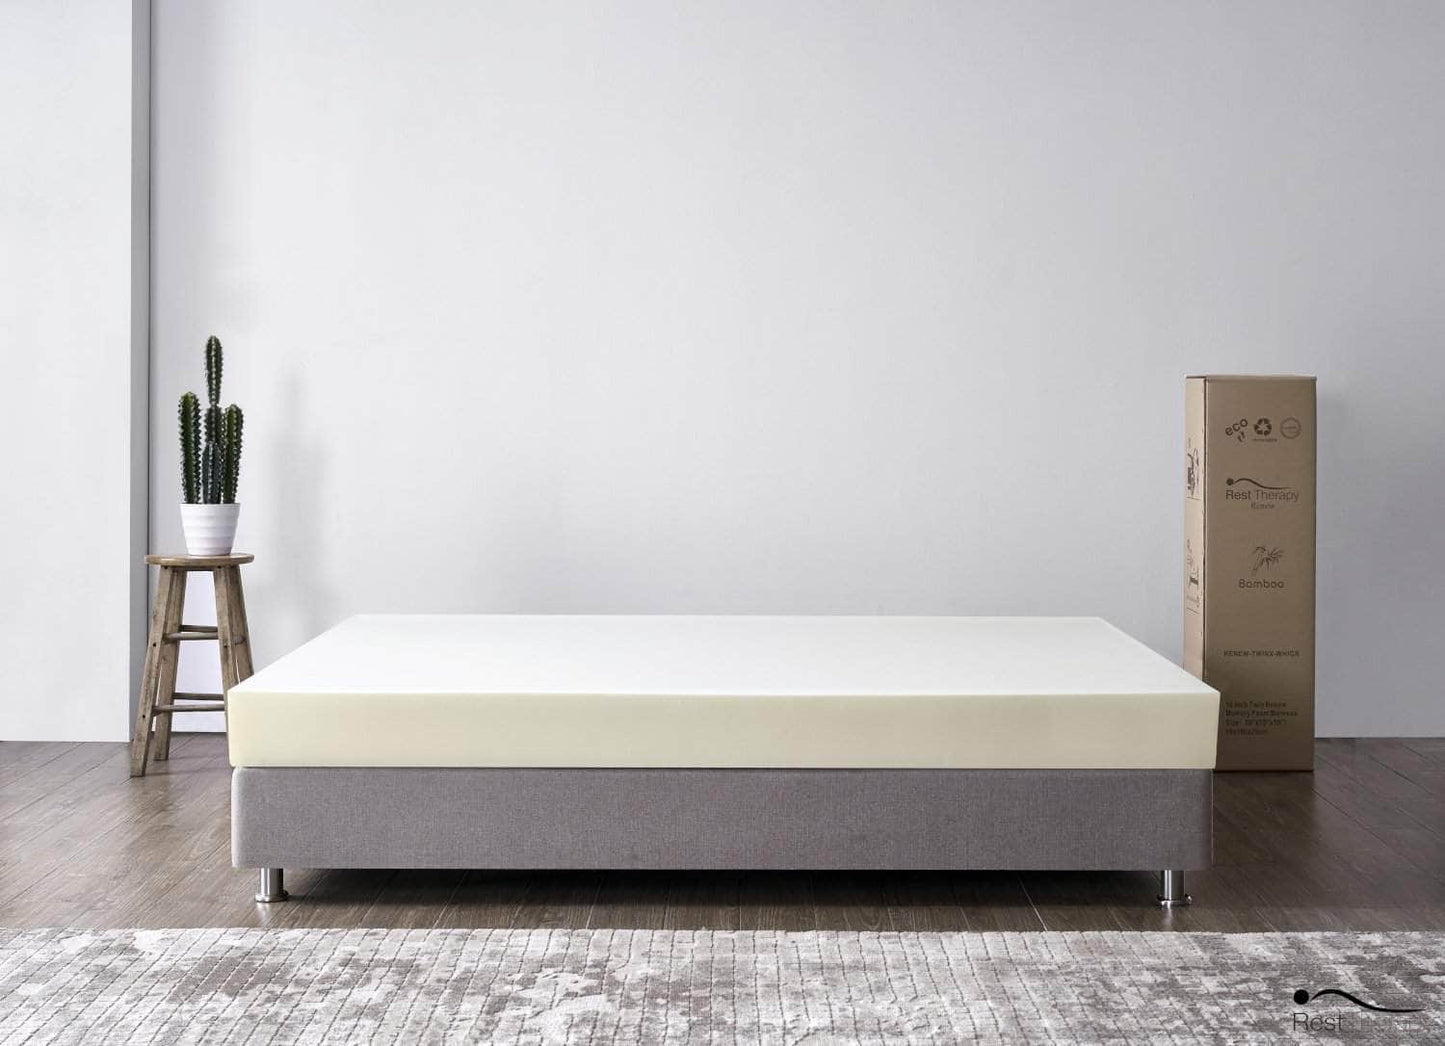 Rest Therapy Mattress 6 Inch Tranquility Bamboo Memory Foam Mattress - Available in 4 Sizes